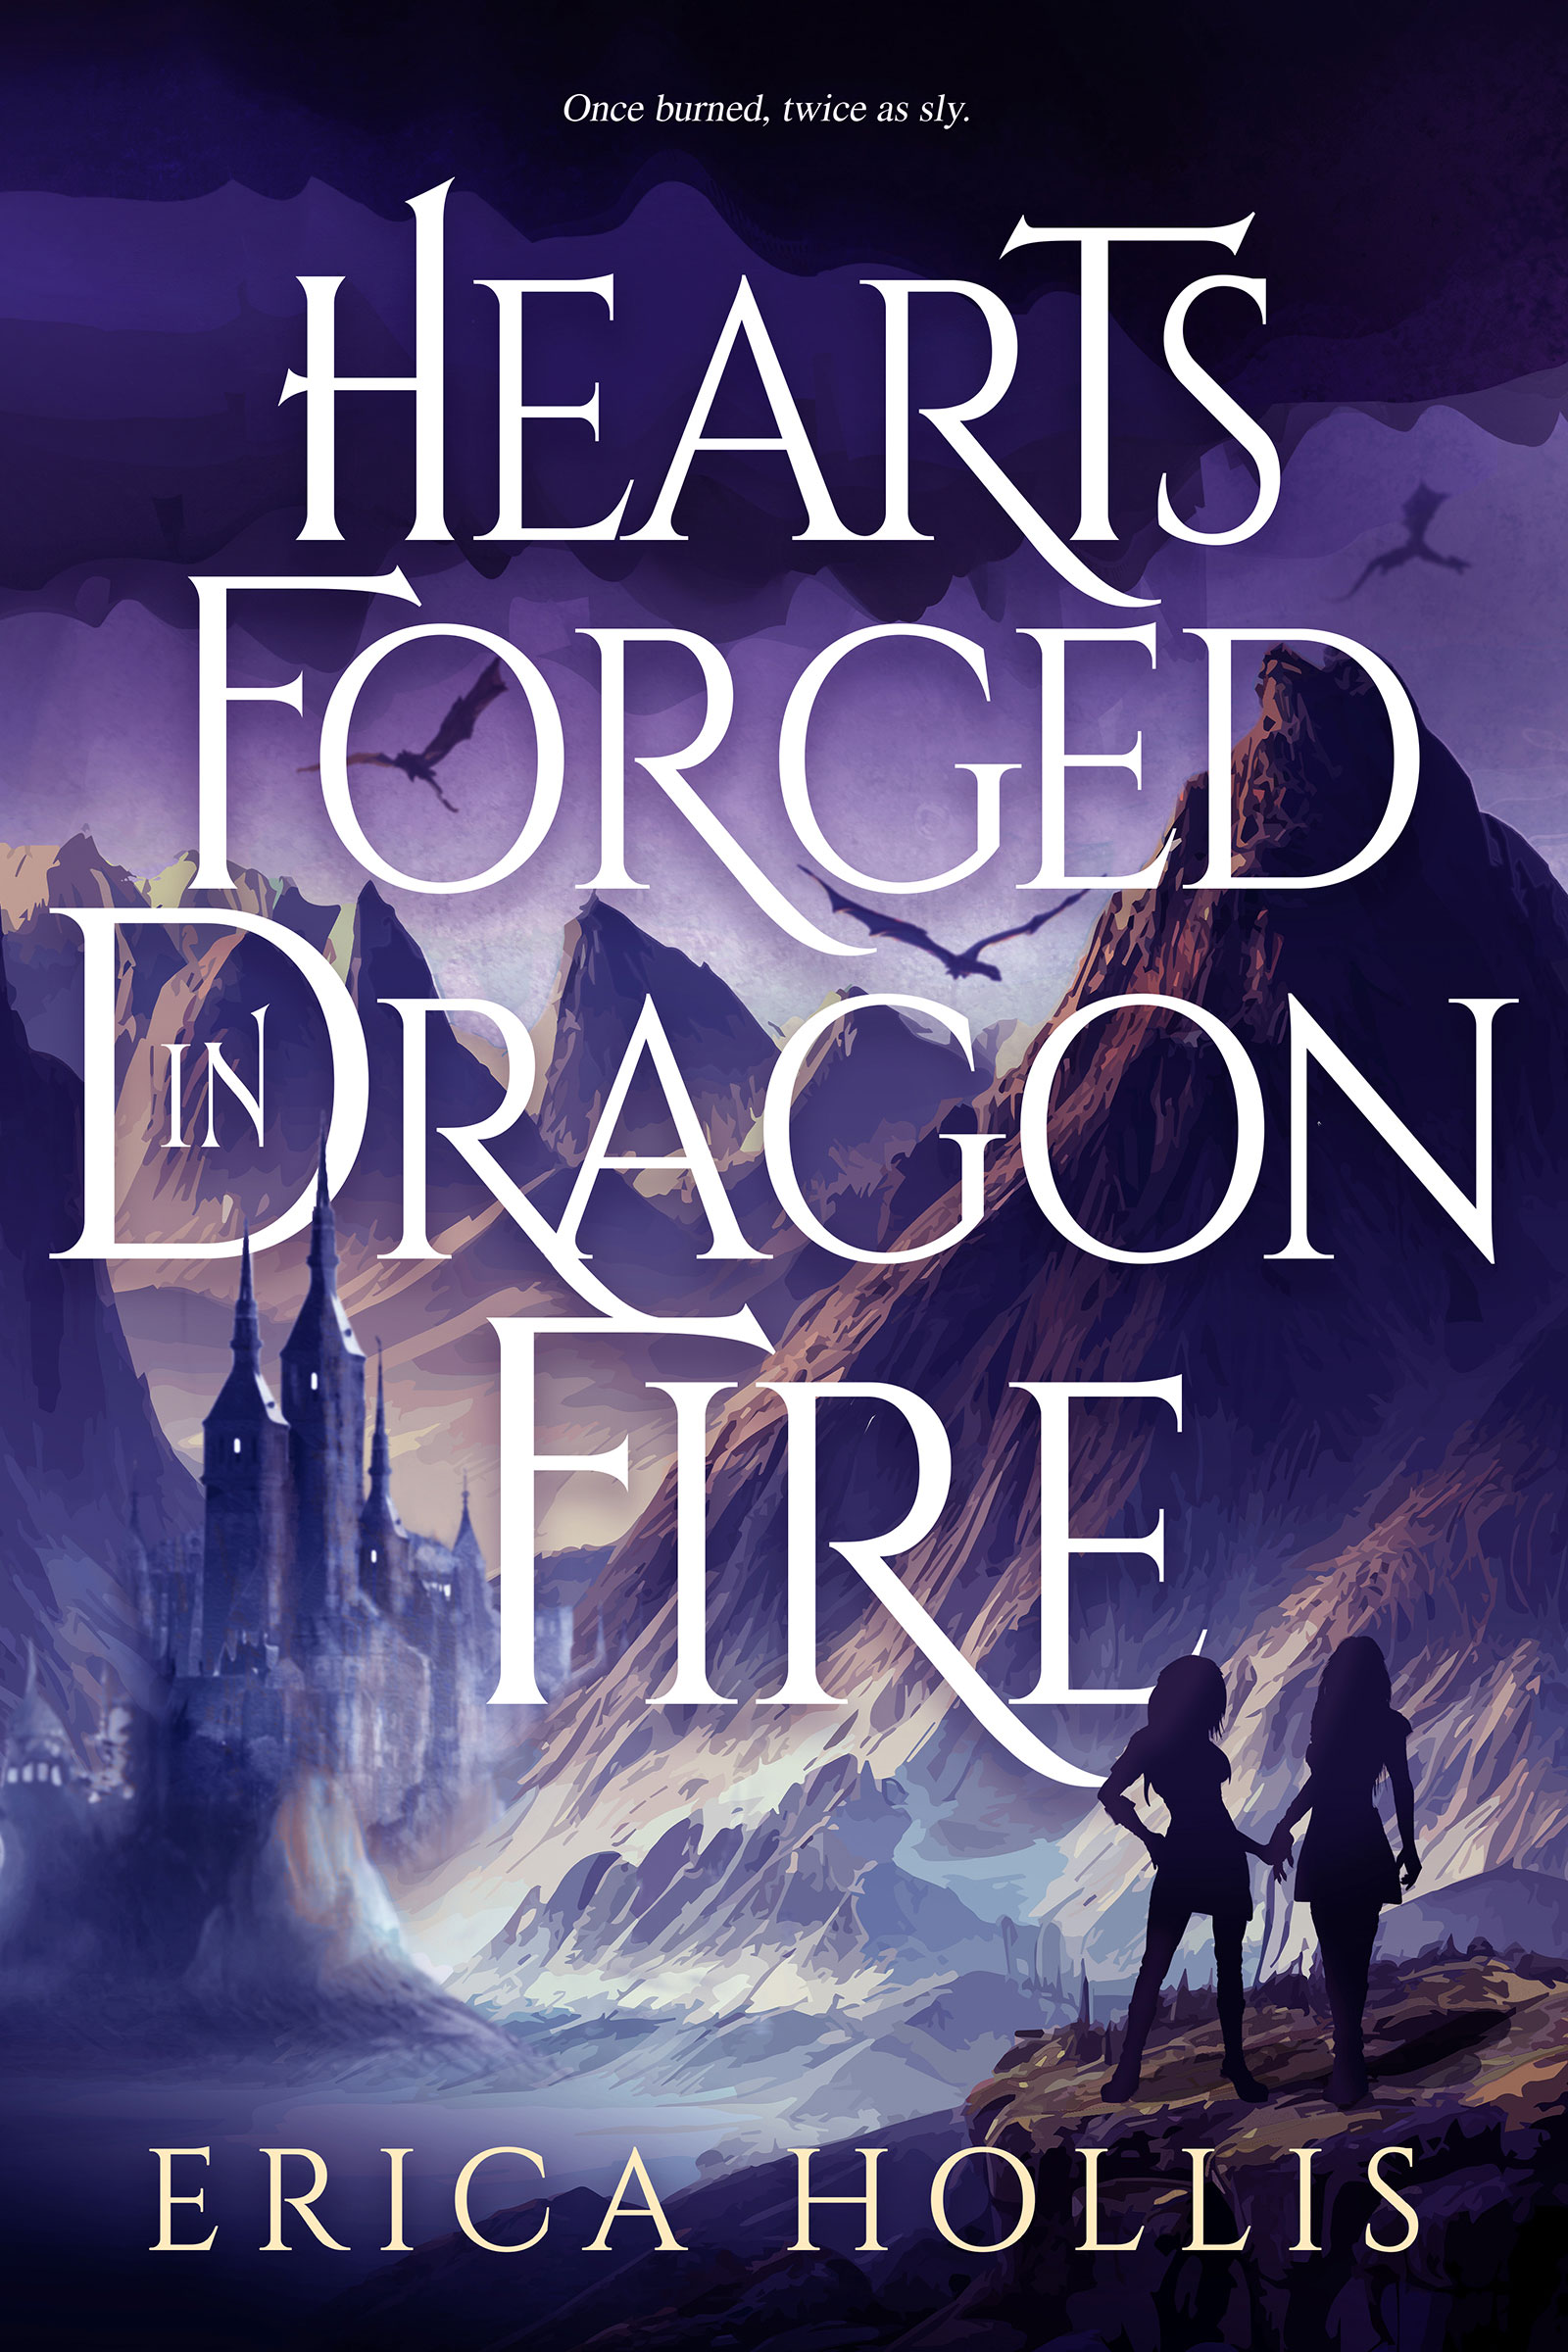 A gradient purple sky with mountains and a castle in the distance, dragons flying in the air. Two women stand in the foreground. At the top of the cover it says "once burned, twice as sly." The title, HEARTS FORGED IN DRAGON FIRE, is across most of the cover. At the bottom is the authors name, ERICA HOLLIS.